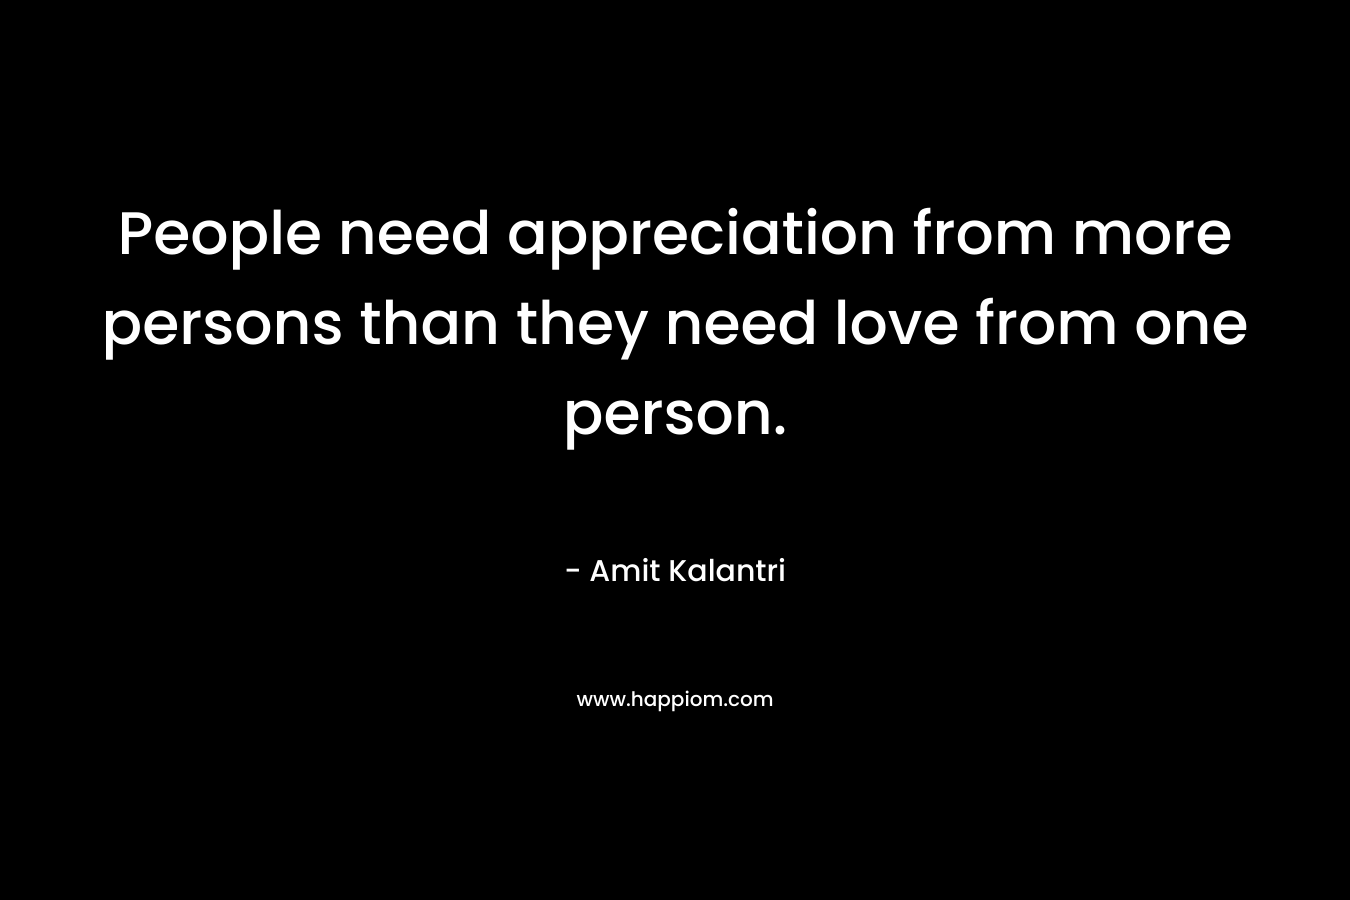 People need appreciation from more persons than they need love from one person. – Amit Kalantri